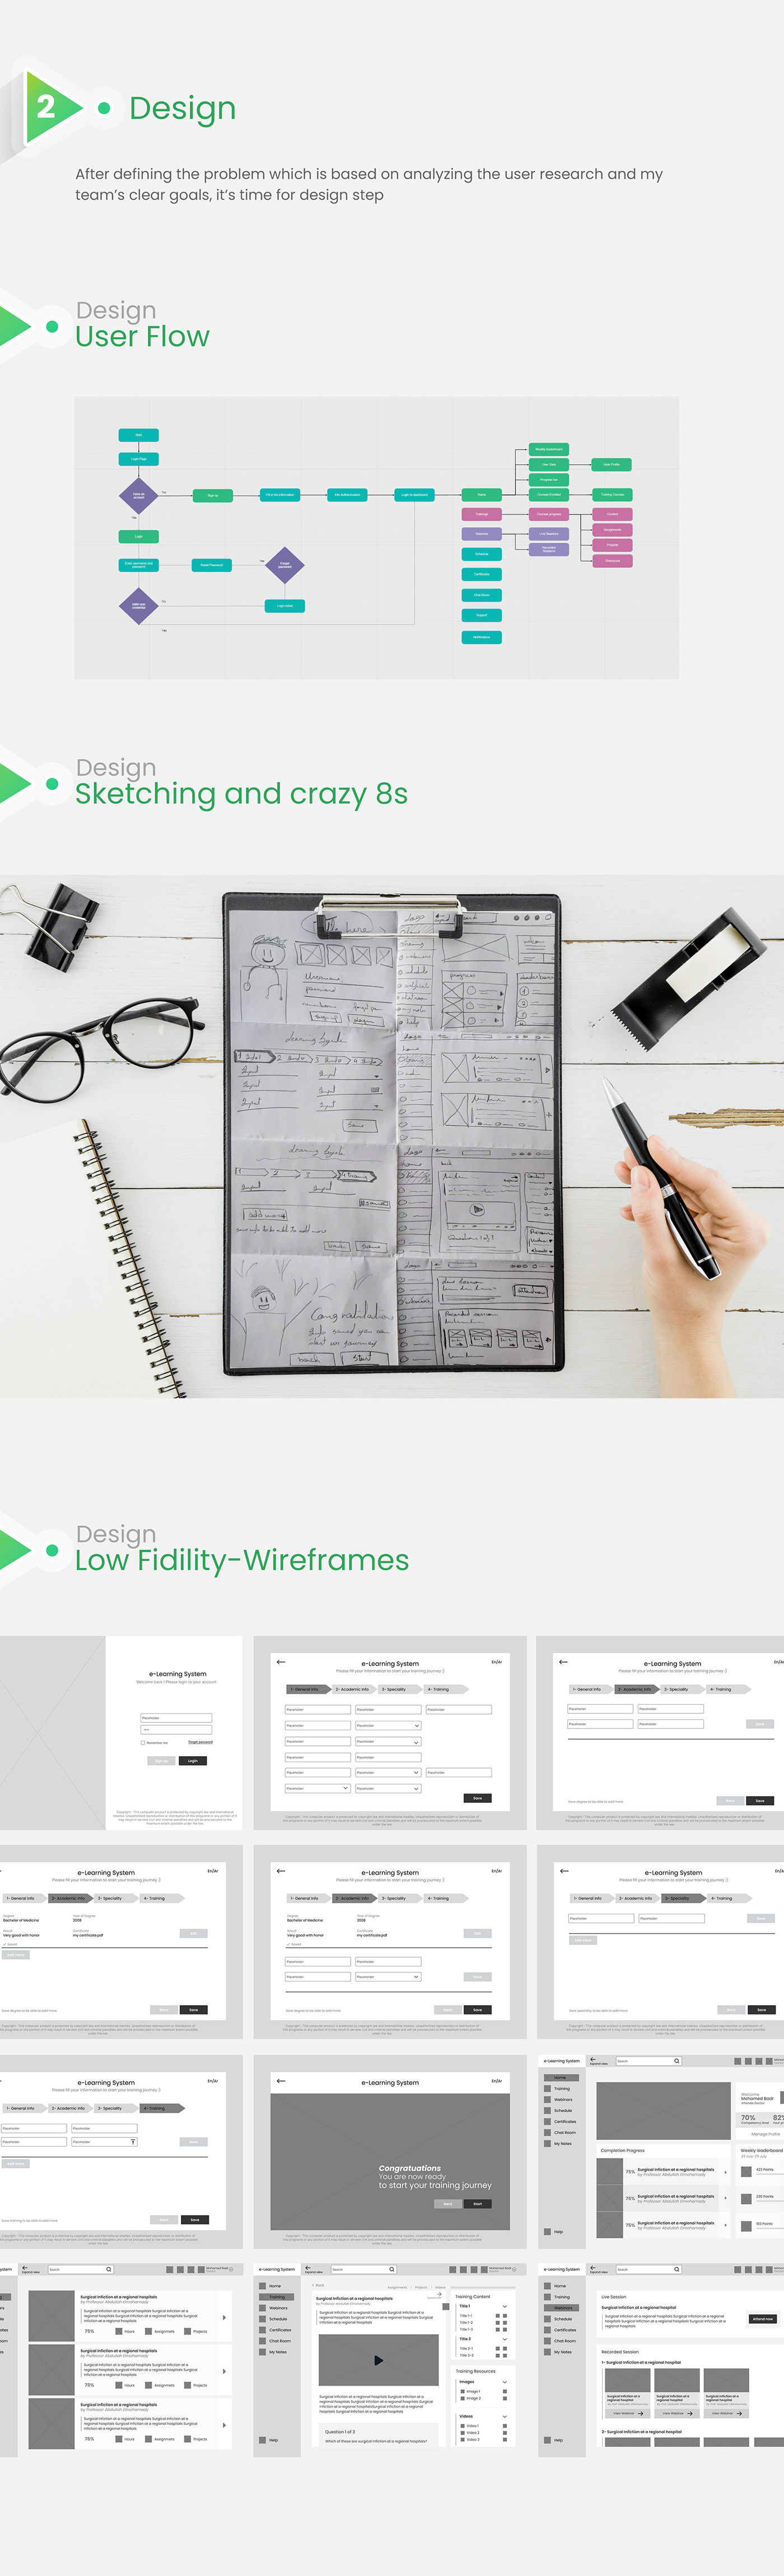 Case Study doctor e-learning medical prototype research user experience ux wireframes course